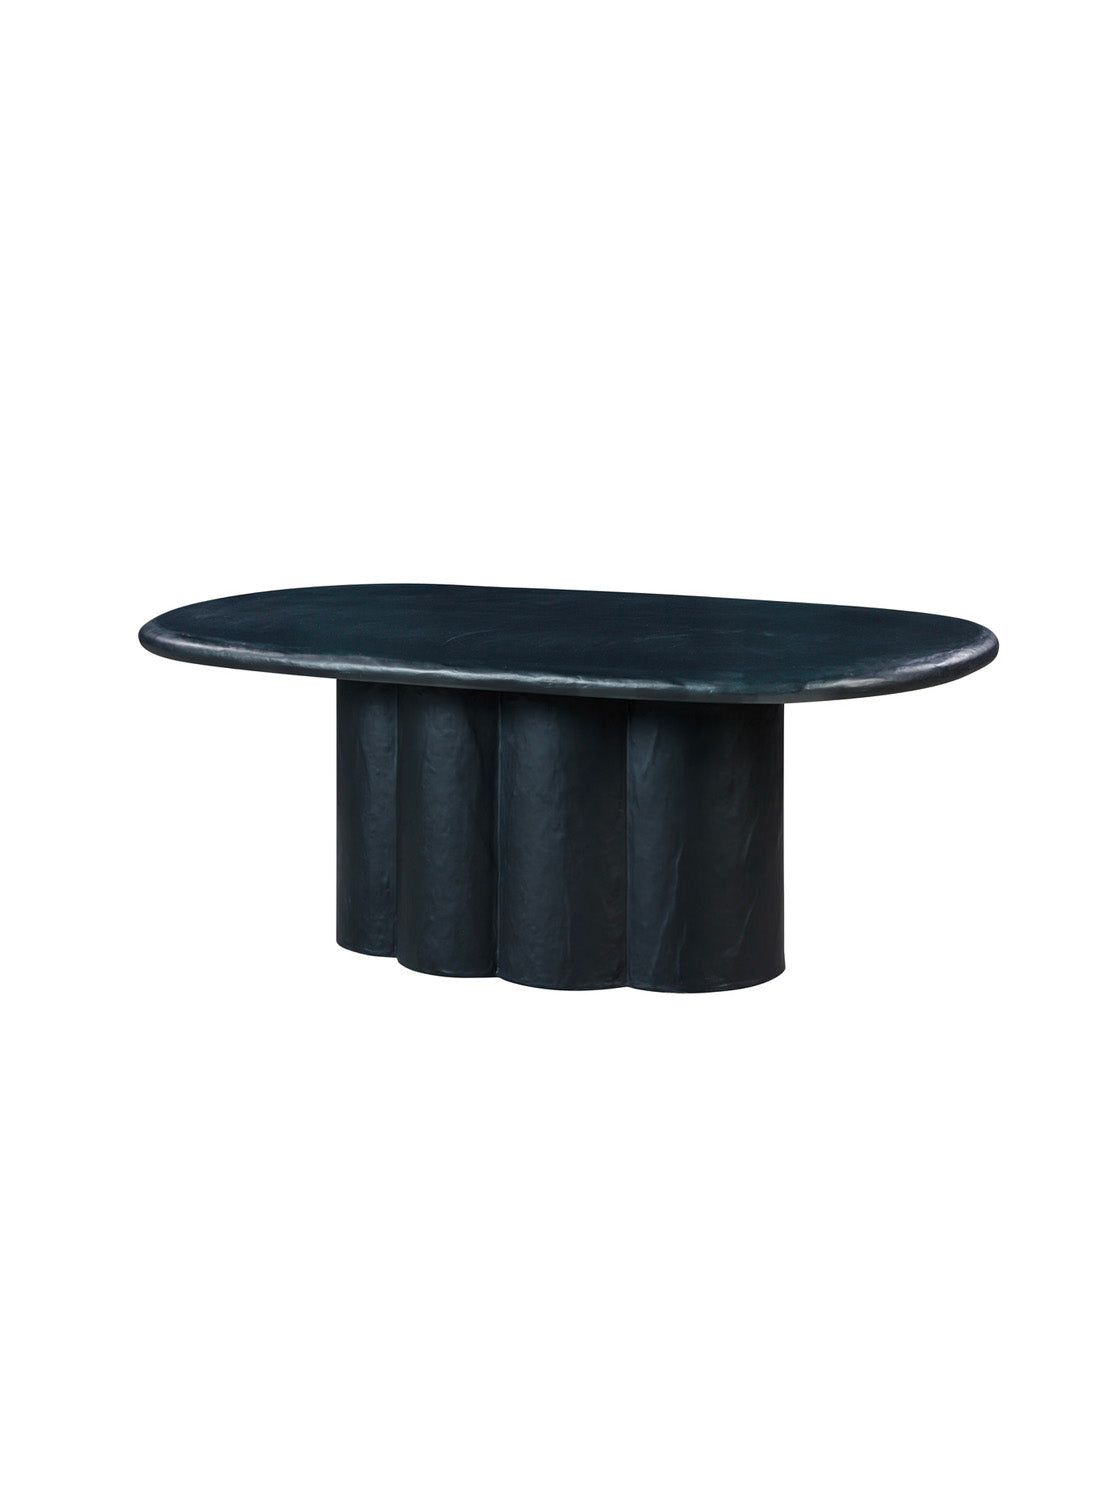 Avery Oval Dining Table, Black